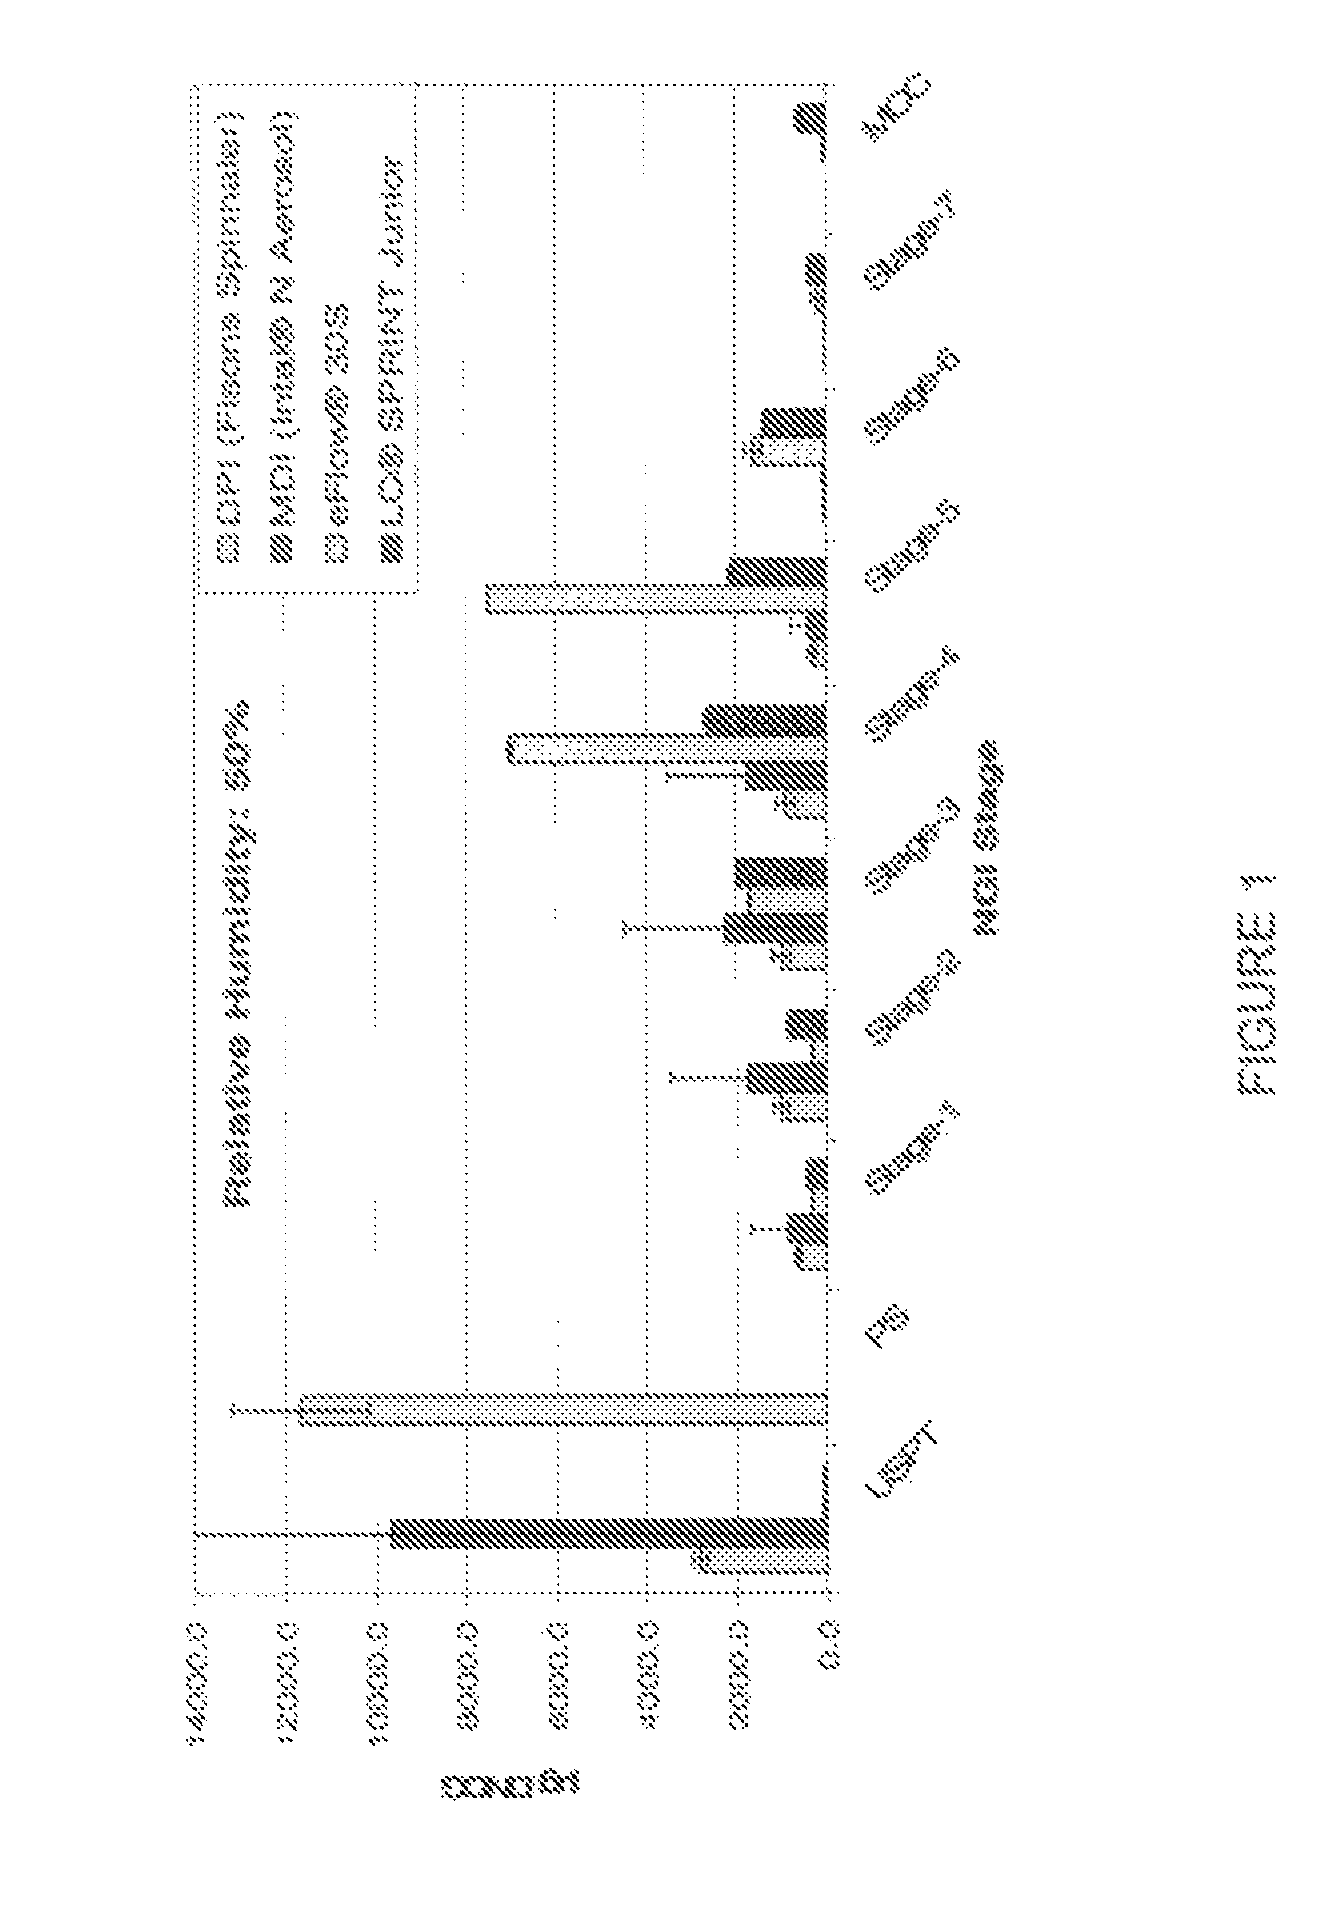 Disodium cromoglycate compositions and methods for administering same